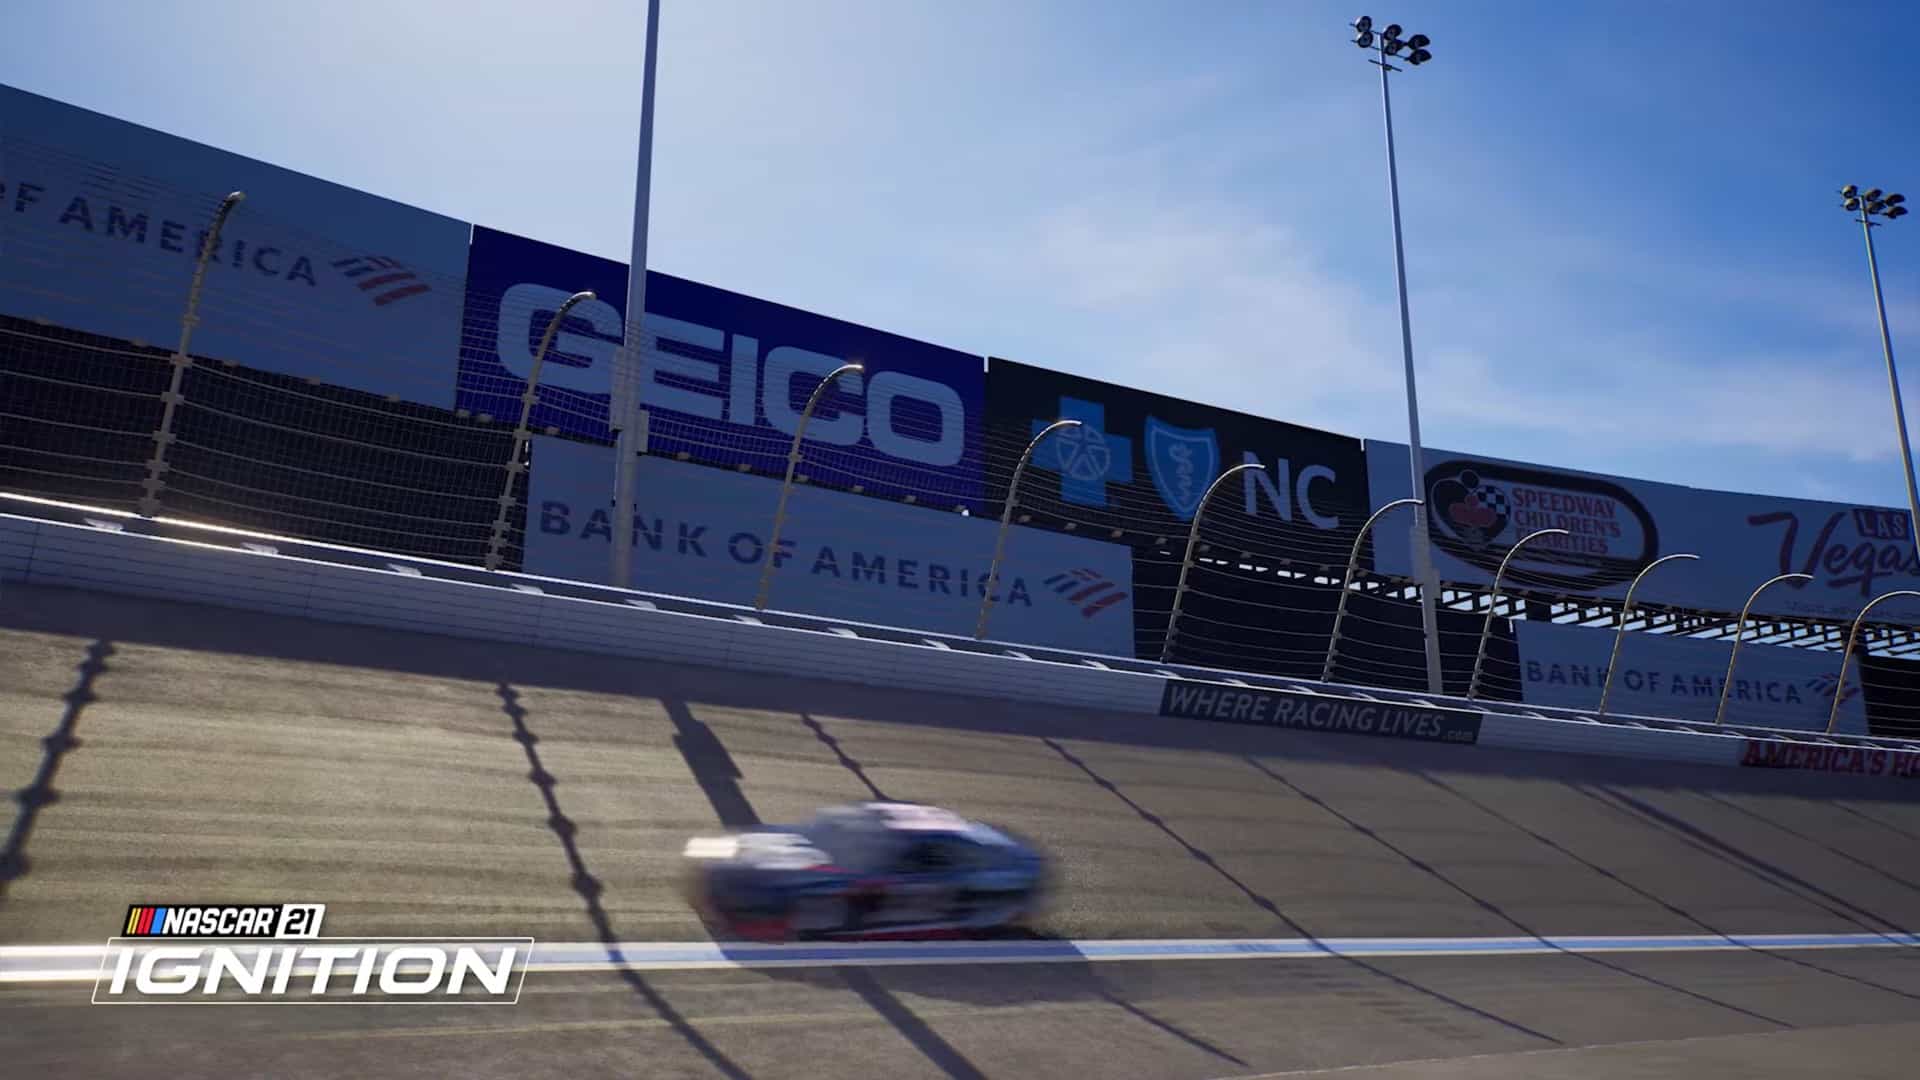 Tracks detailed in NASCAR 21: Ignition 'Dev Diary' #2